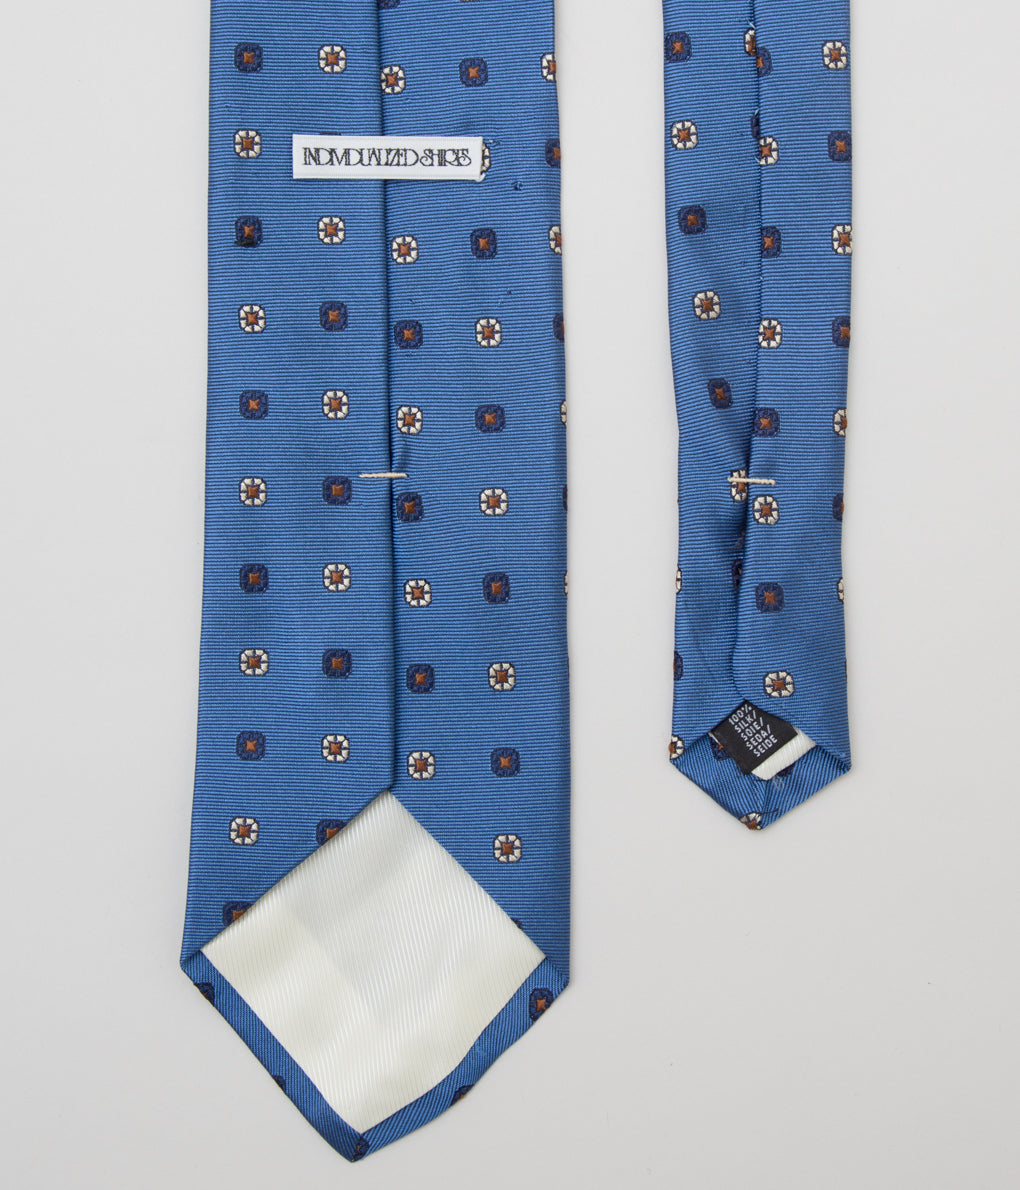 INDIVIDUALIZED ACCESSORIES"NEATLY SPACED PATTERN TIE"(BLUE)